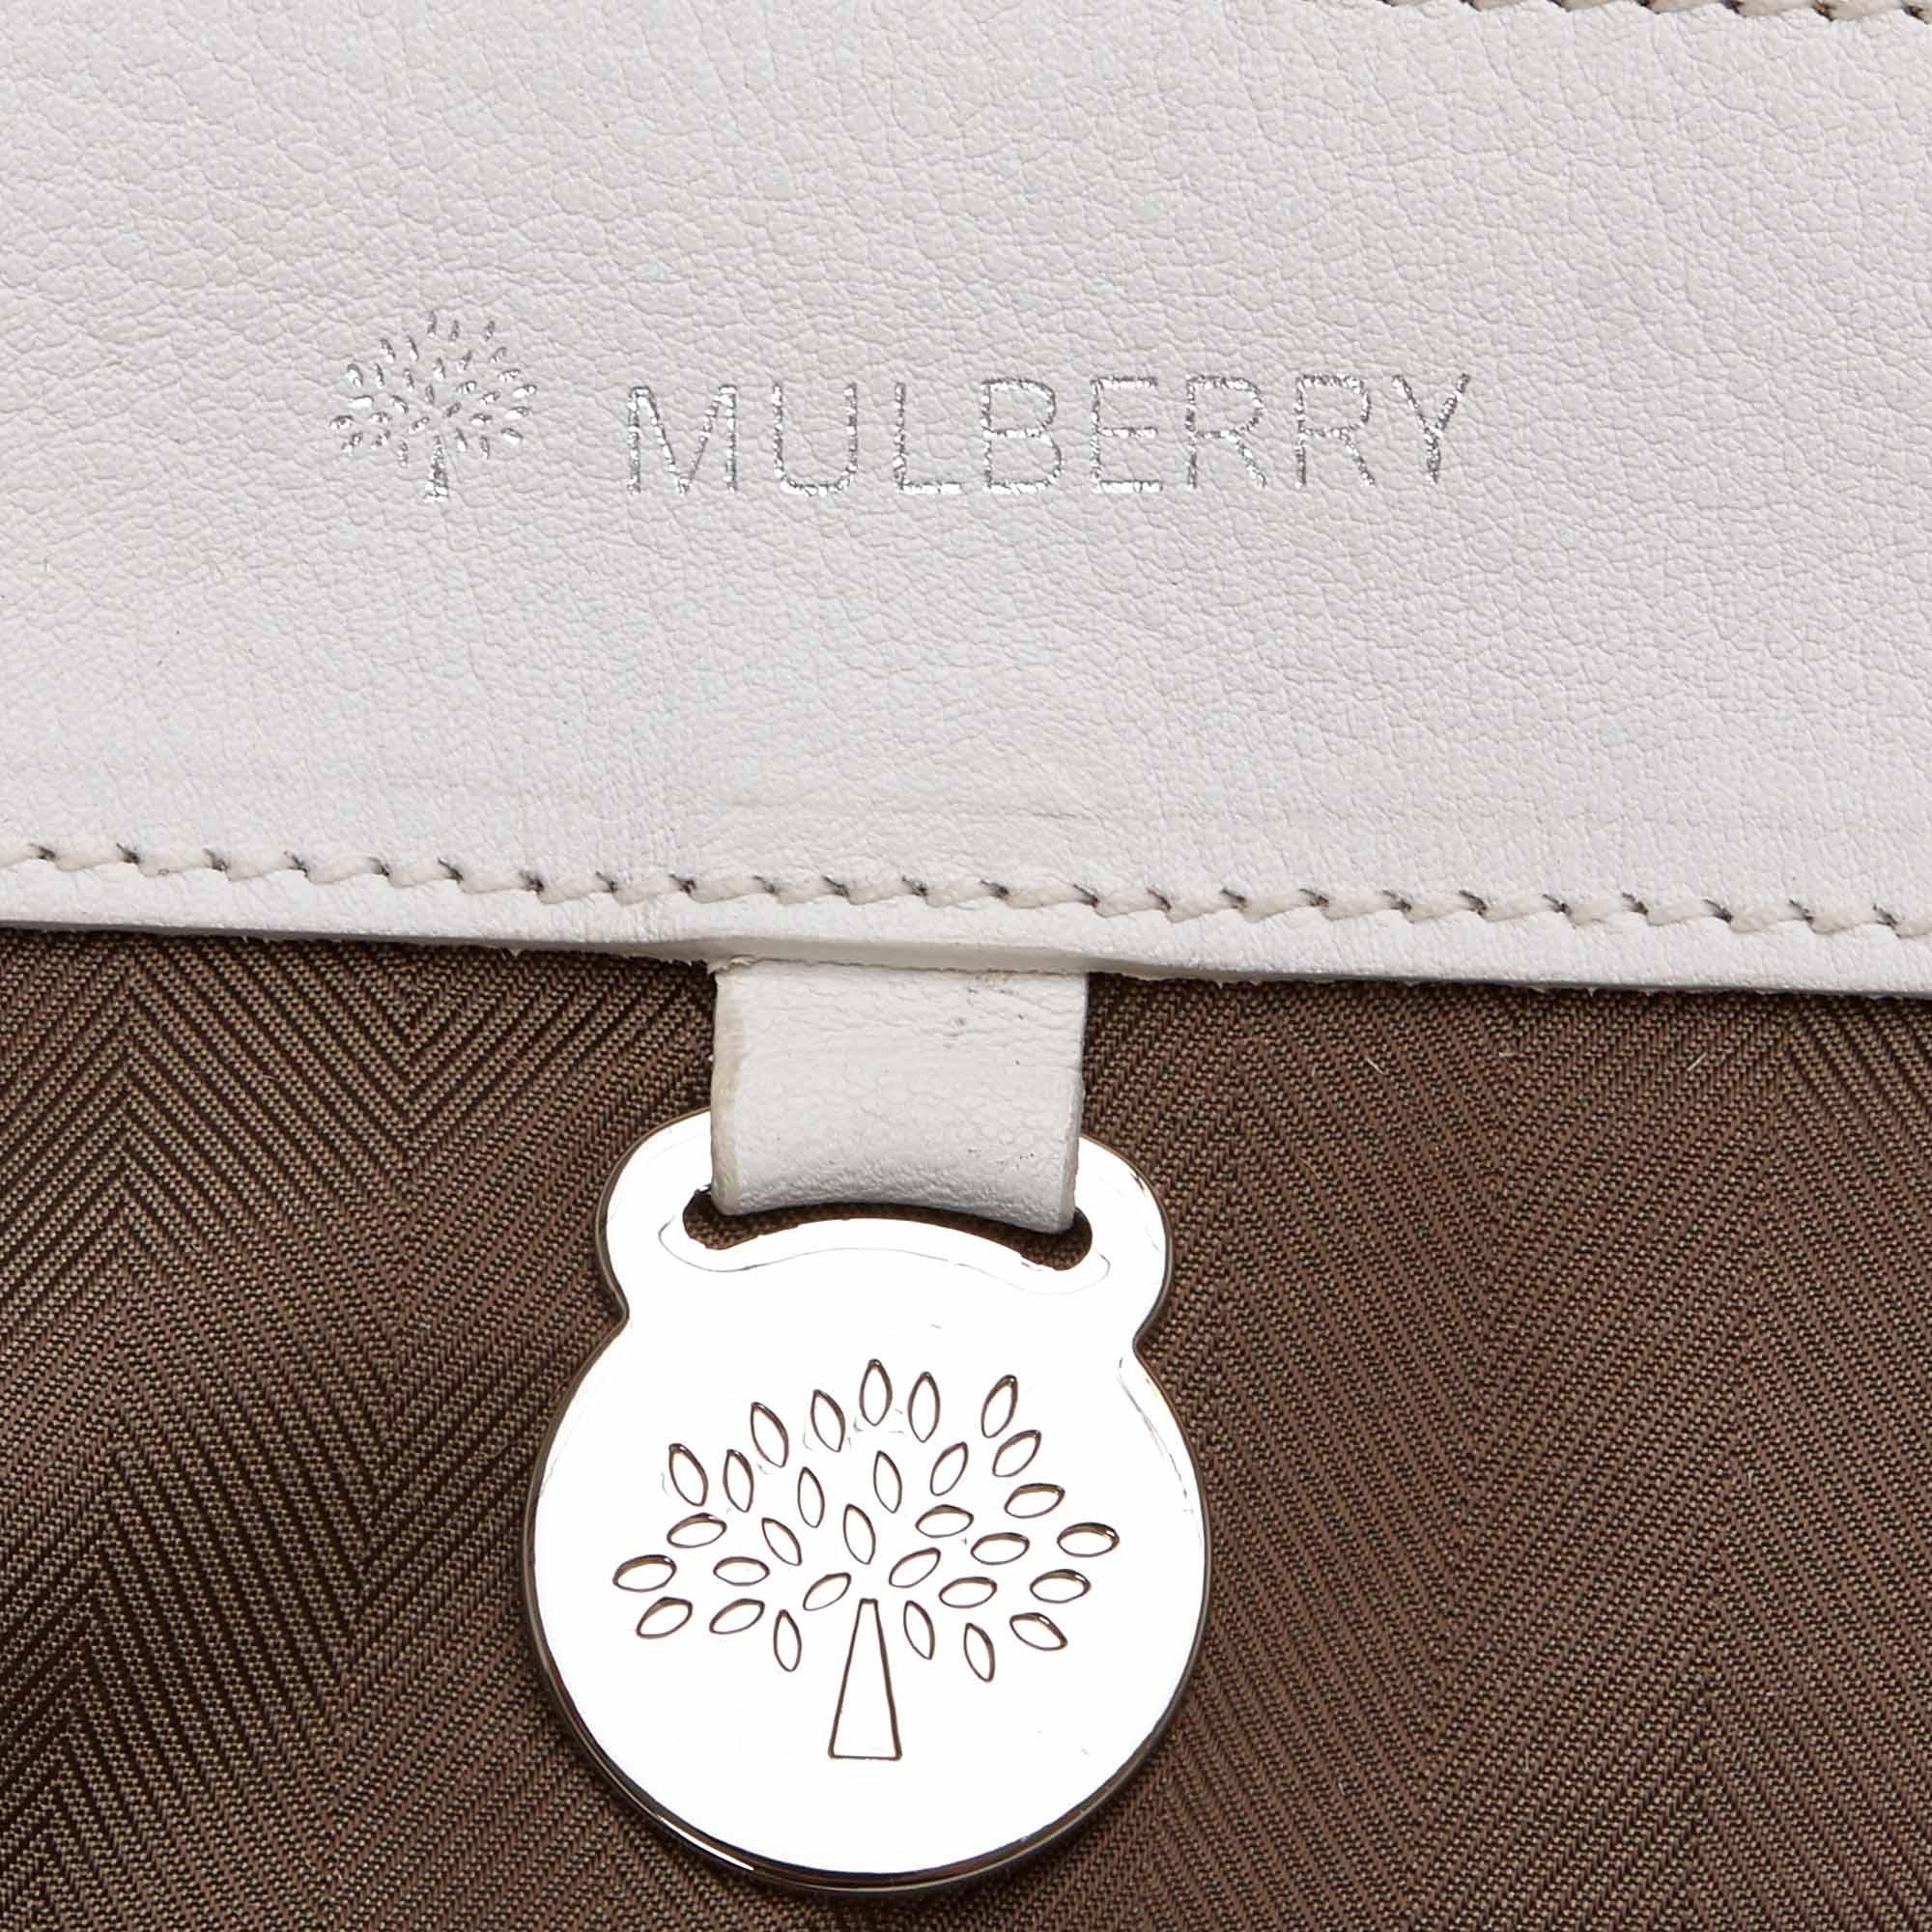 Beige Vintage Authentic Mulberry Leather Bayswater w Dust Bag Padlock Key LARGE 